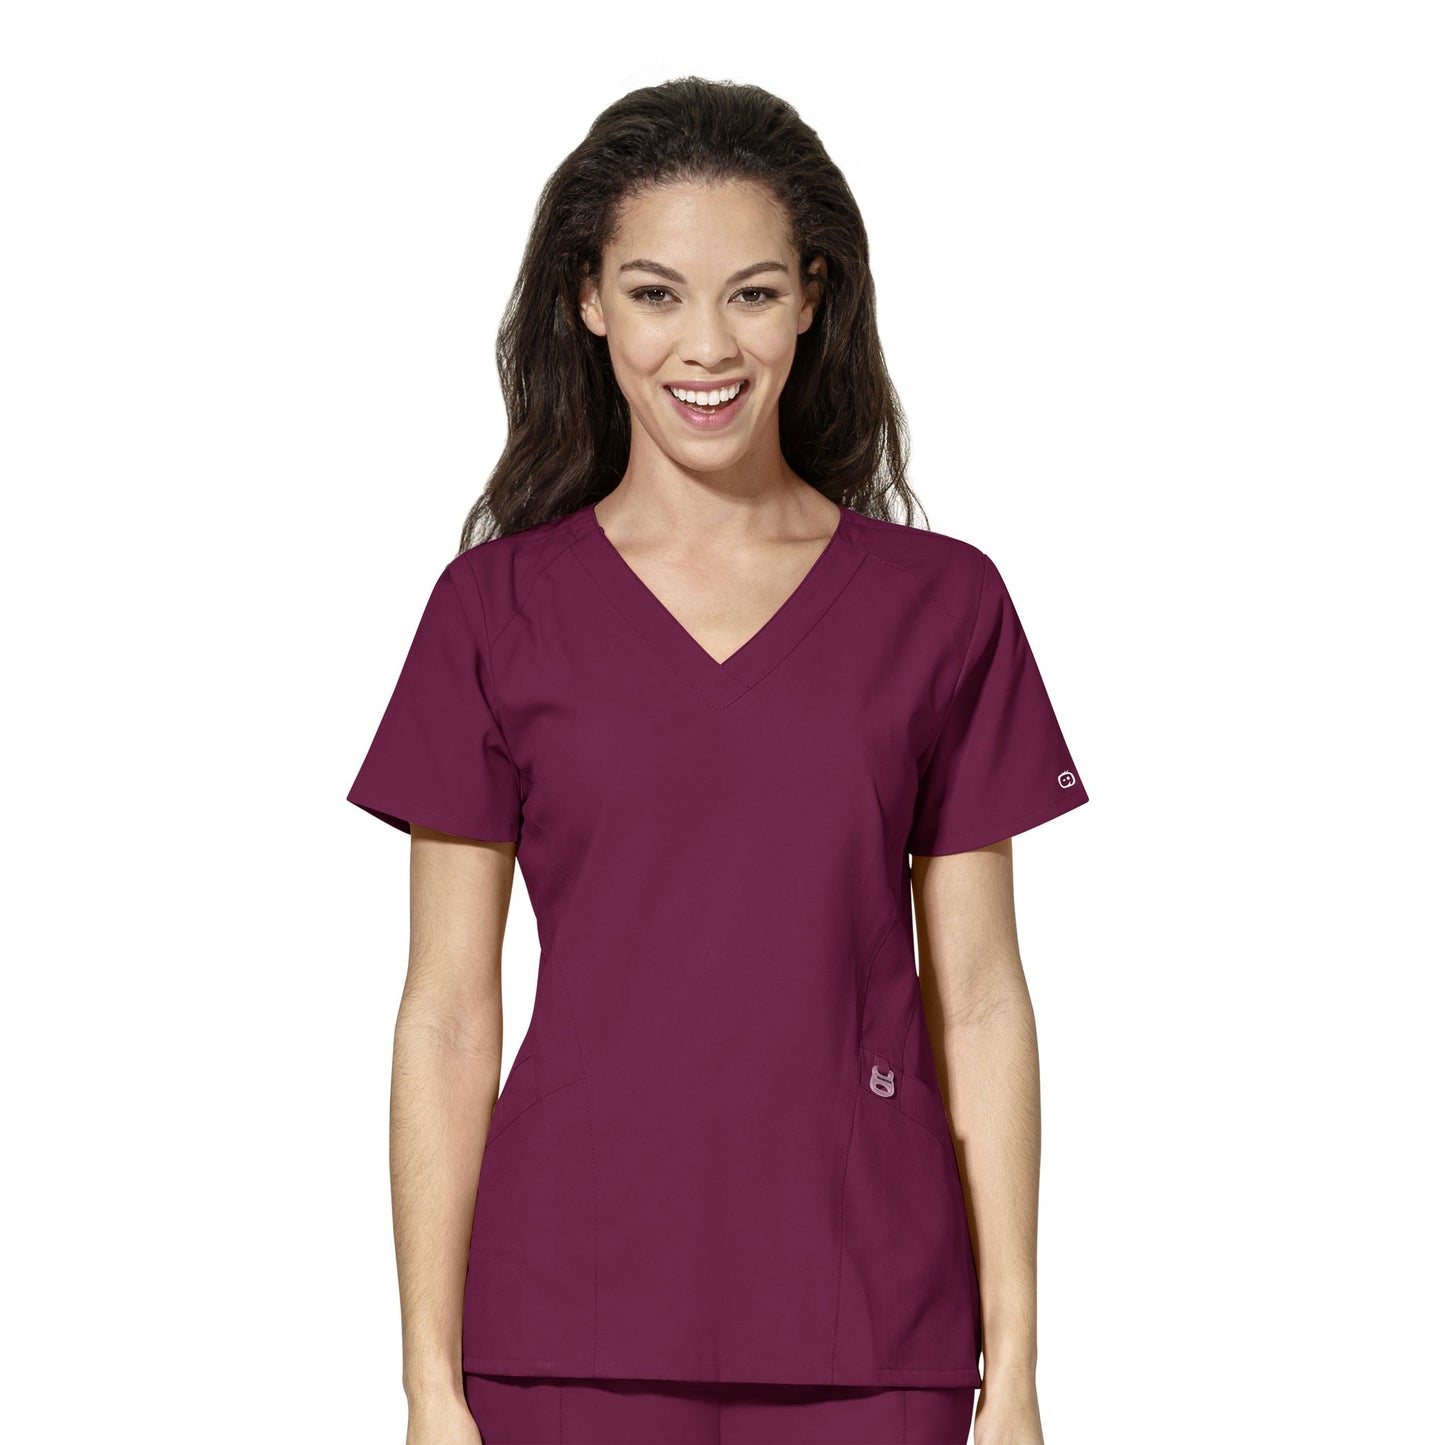 Women's V Neck Shirt in Wine - MCPHS Embroidery +Name